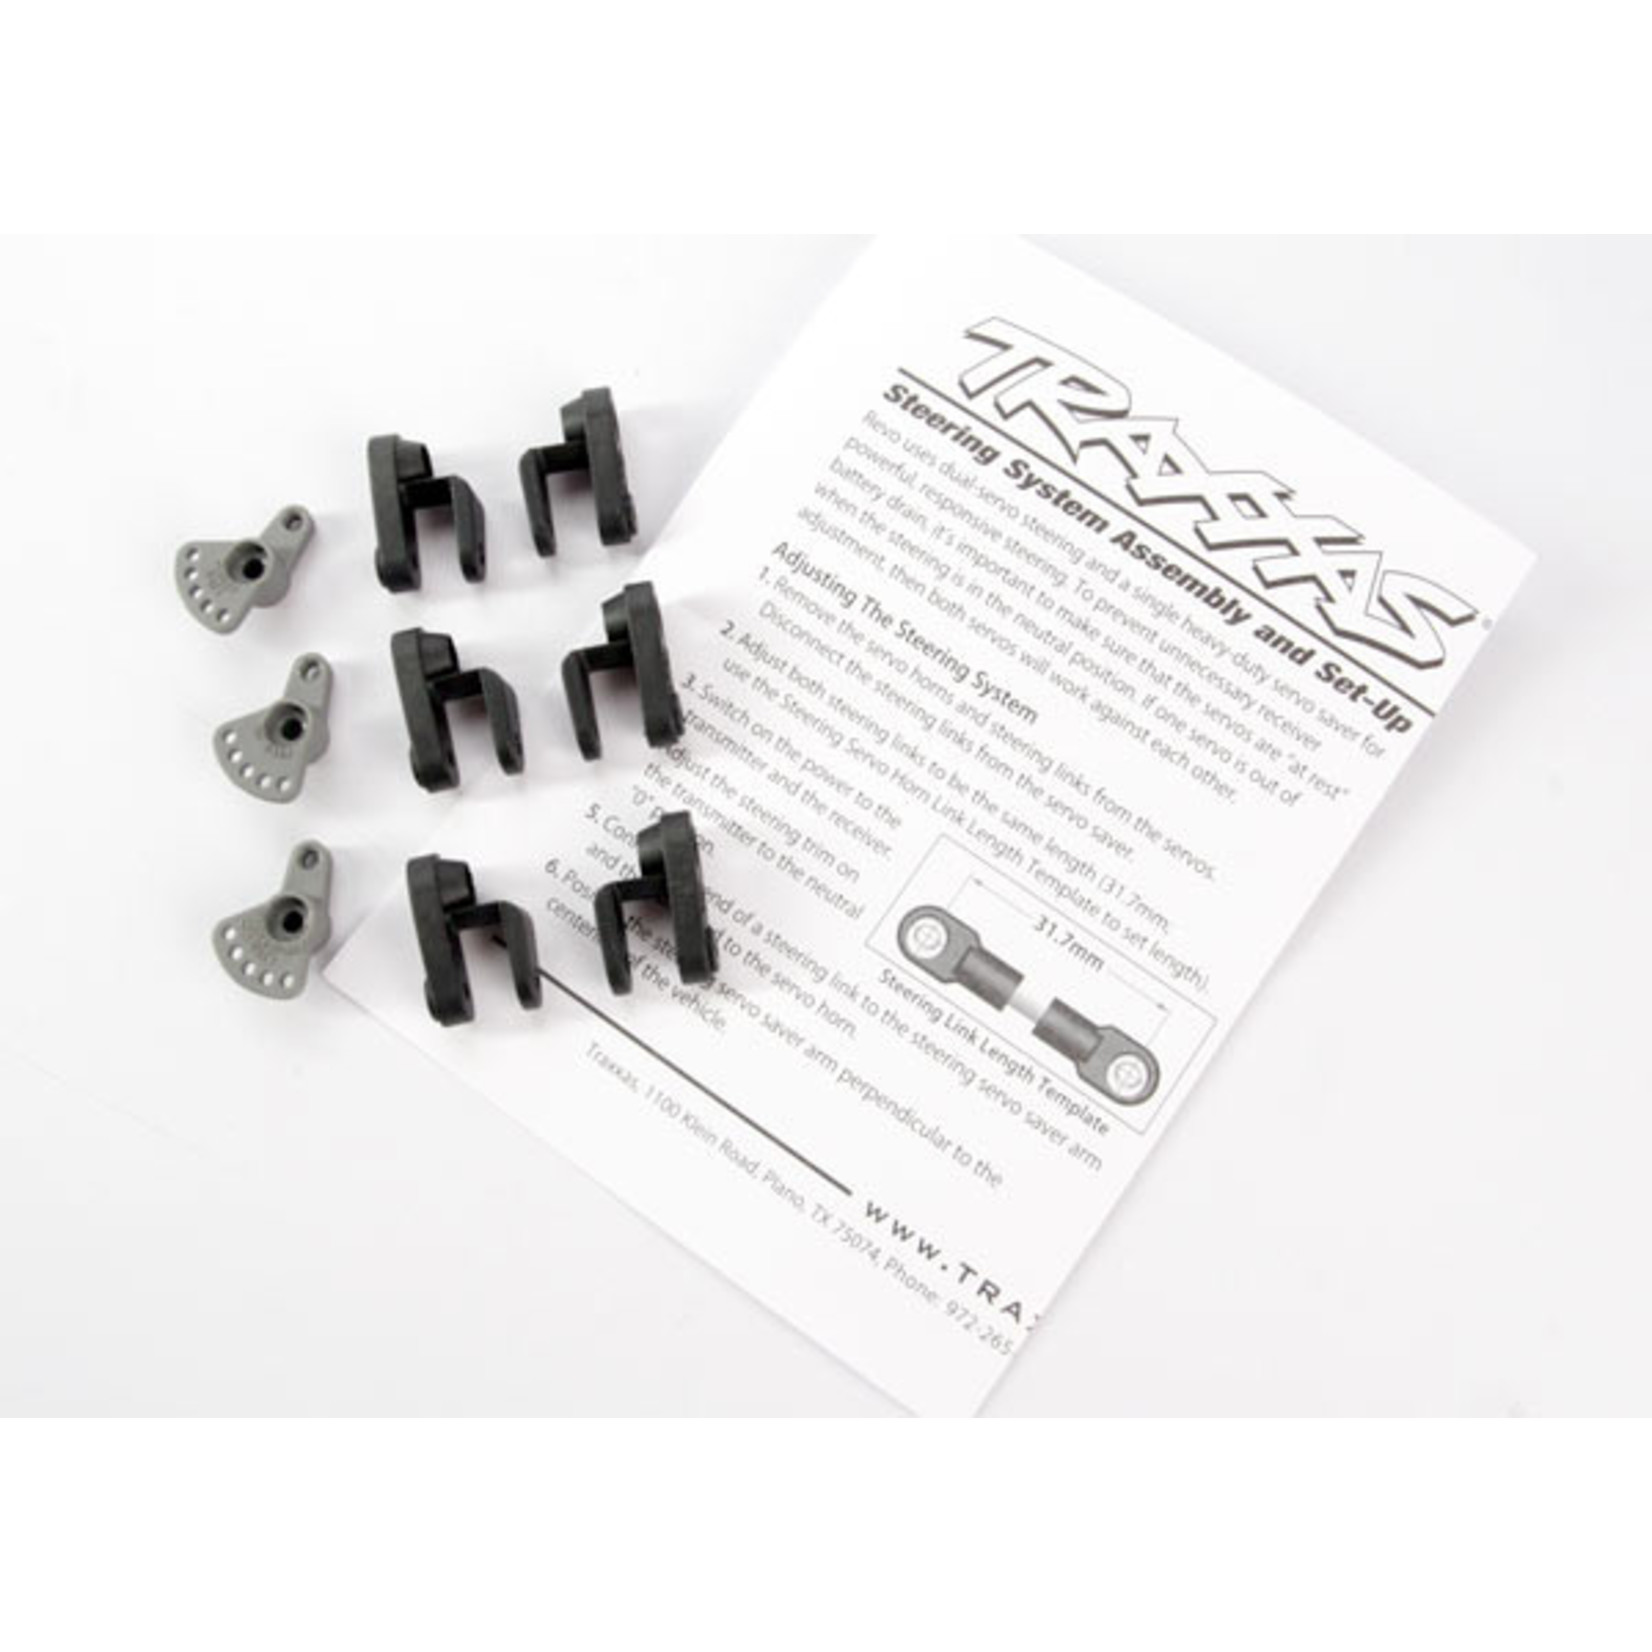 Traxxas 5345X - Servo horns, steering and throttle (for no